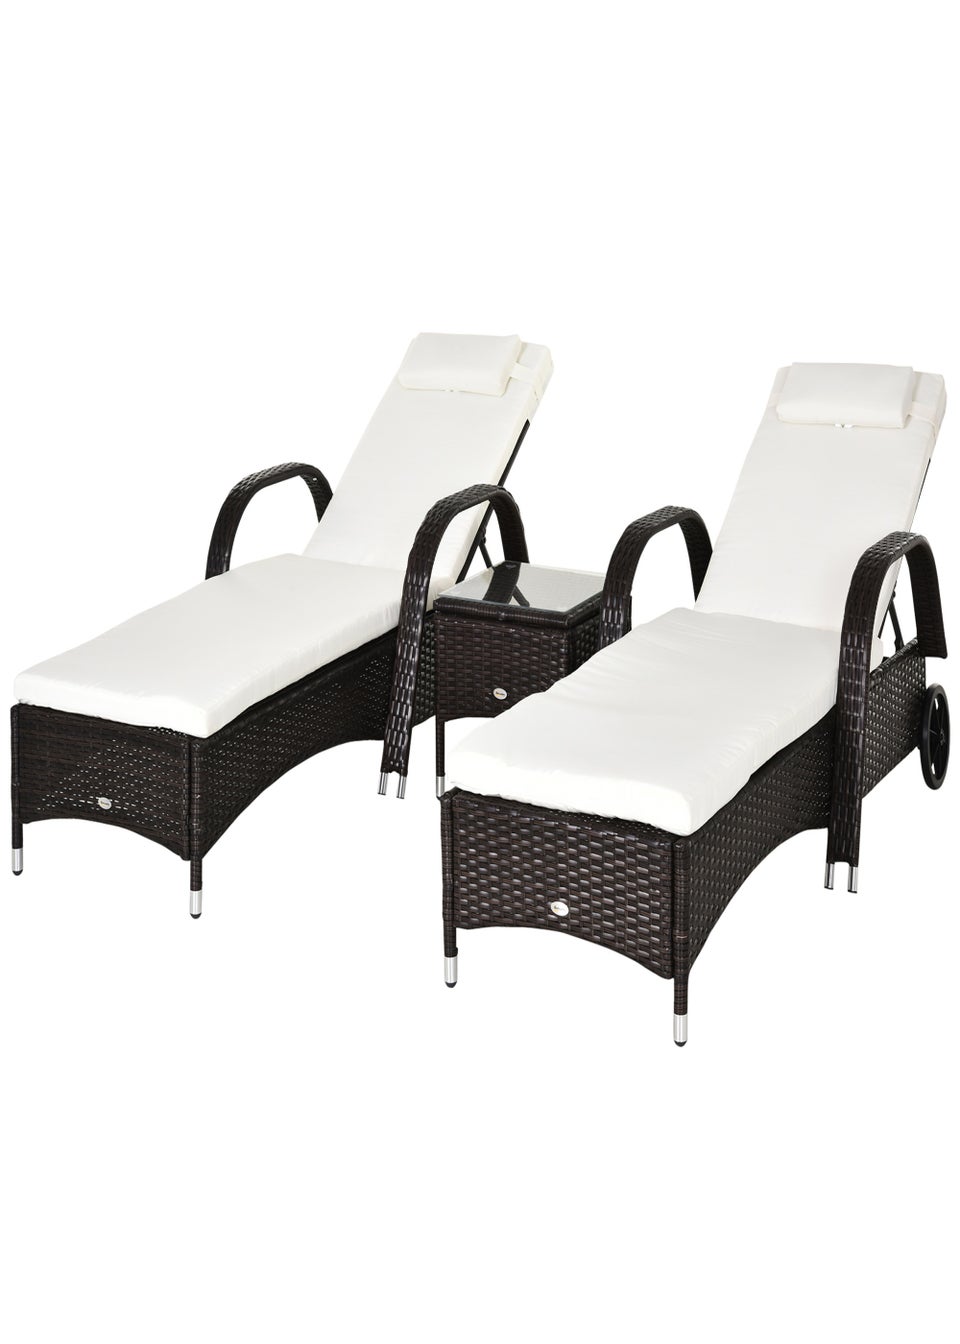 Outsunny 3 Pieces PE Rattan Patio Lounge Chair Set, Outdoor Recliner Lounge Chairs with Wheels for Outside with Cushions